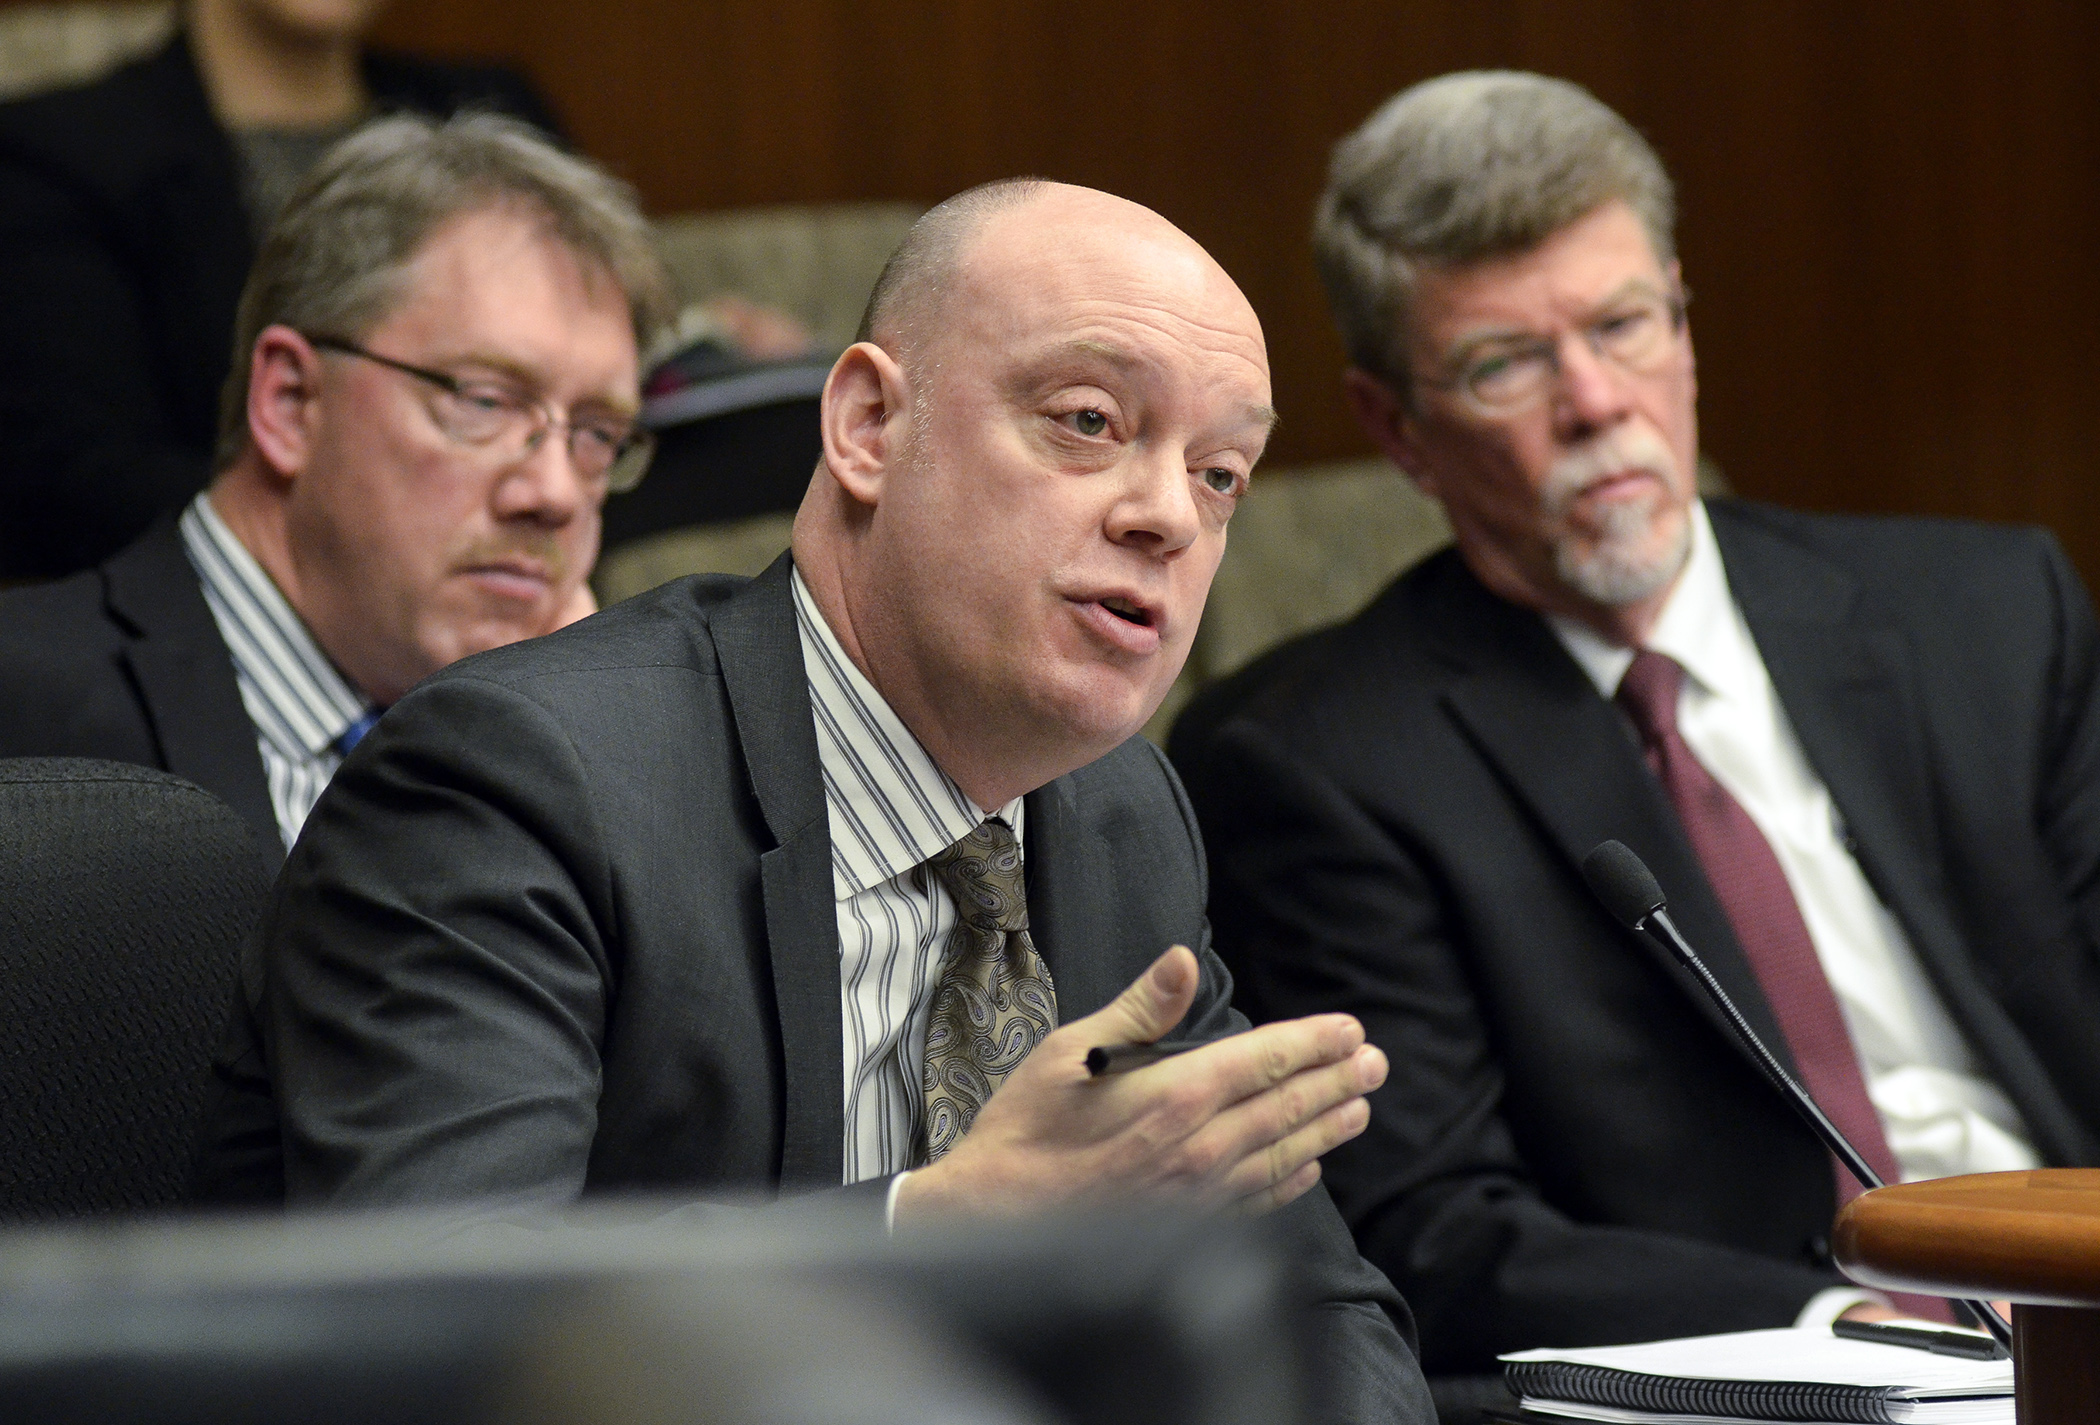 MNSure CEO Scott Leitz testifies Feb. 17 about an Office of the Legislative Auditor evaluation of MNsure. Listening to Leitz are Joel Alter, left, a program evaluation manager with the office, and Legislative Auditor Jim Nobles. Photo by Andrew VonBank